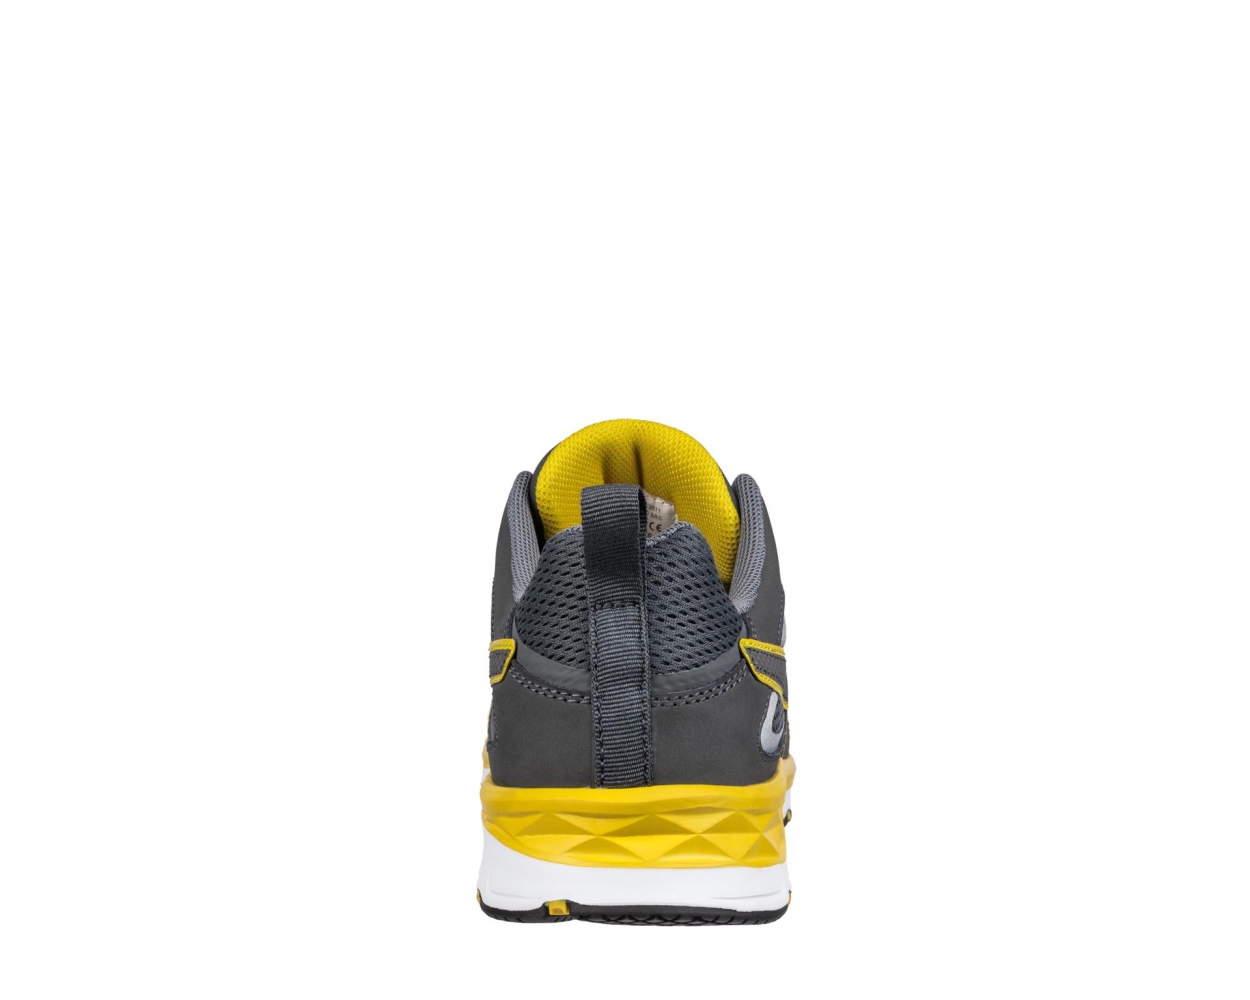 pics/Albatros/Safety Shoes/643800/puma-643800-pace-2-yellow-low-822-back.jpg